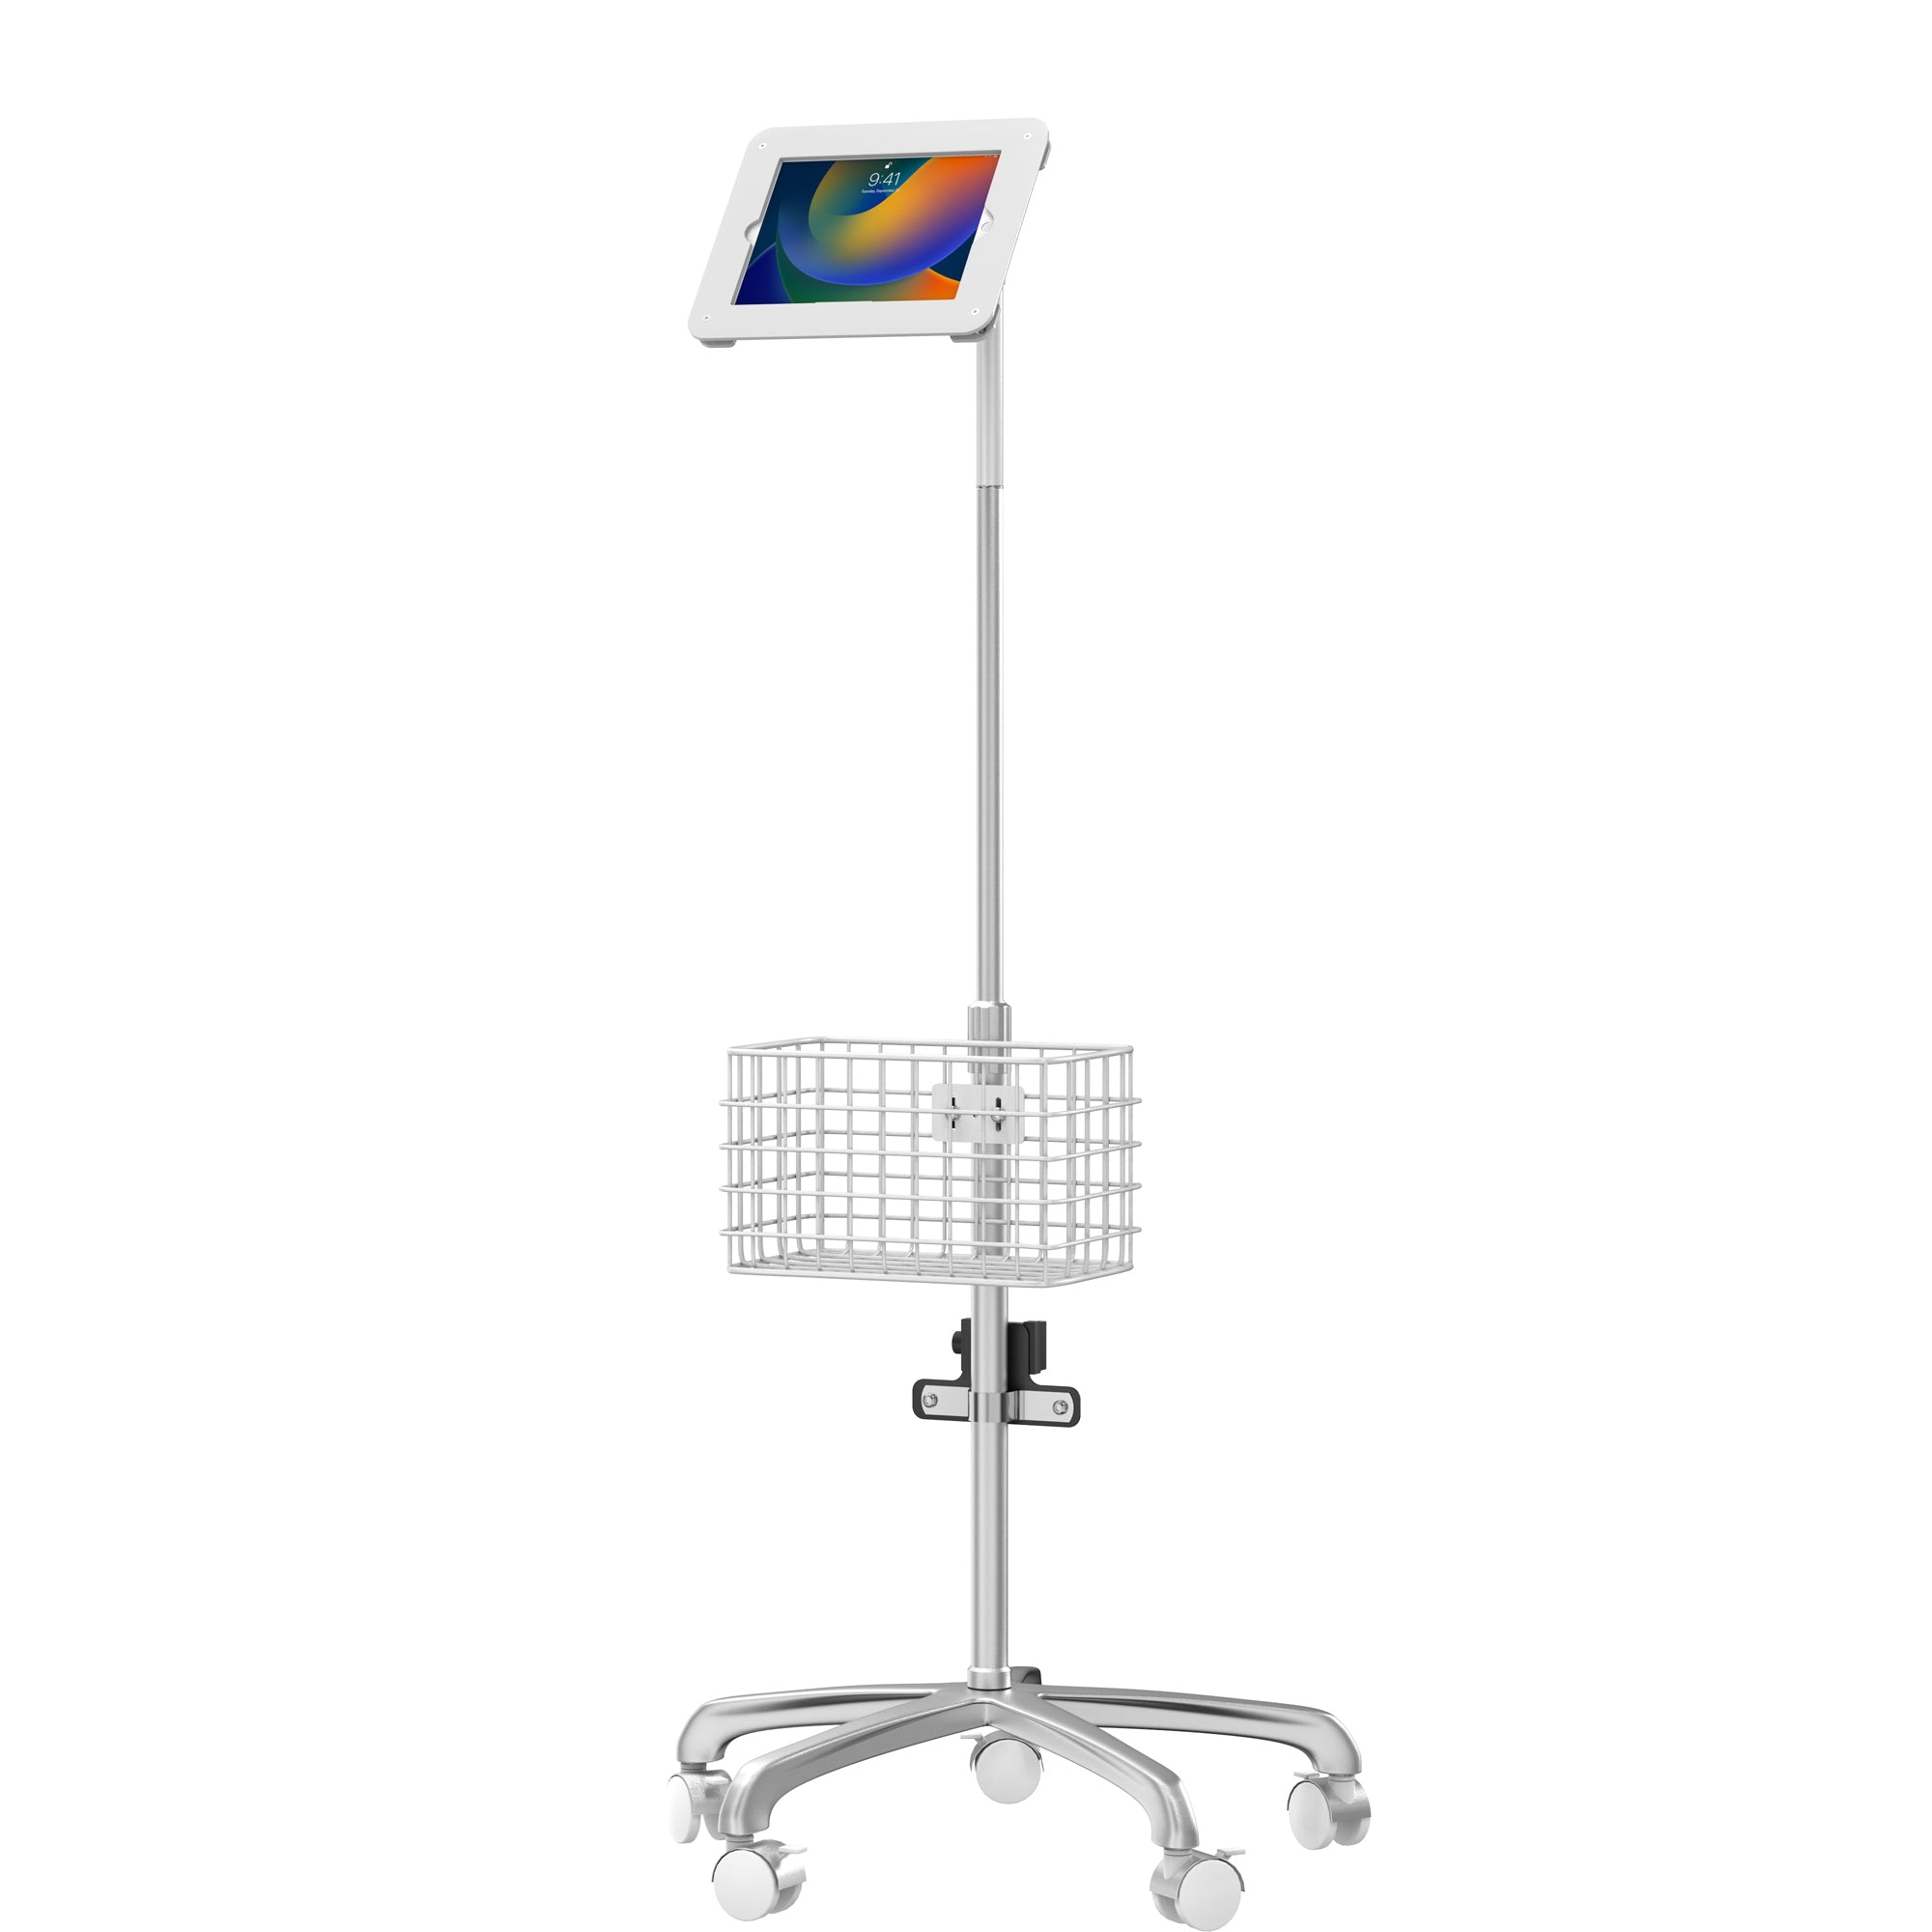 Medical Rolling Cart with Articulating Arm & Accessories for iPad 10.2 Series, iPad Air 3, and iPad Pro 10.5